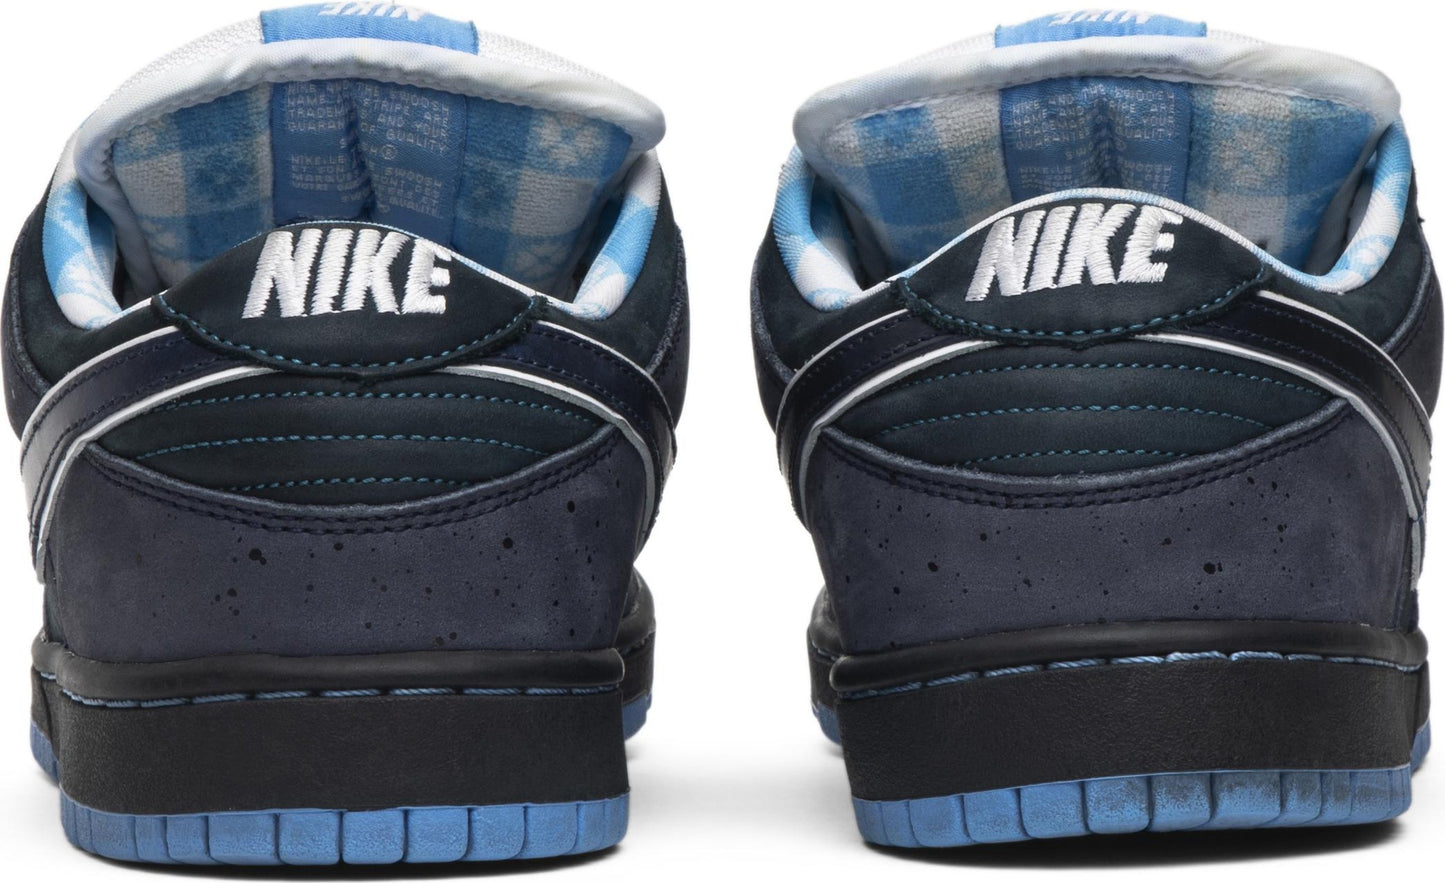 NIKE - Nike Dunk Low Premium SB Blue Lobster x Concepts Sneakers